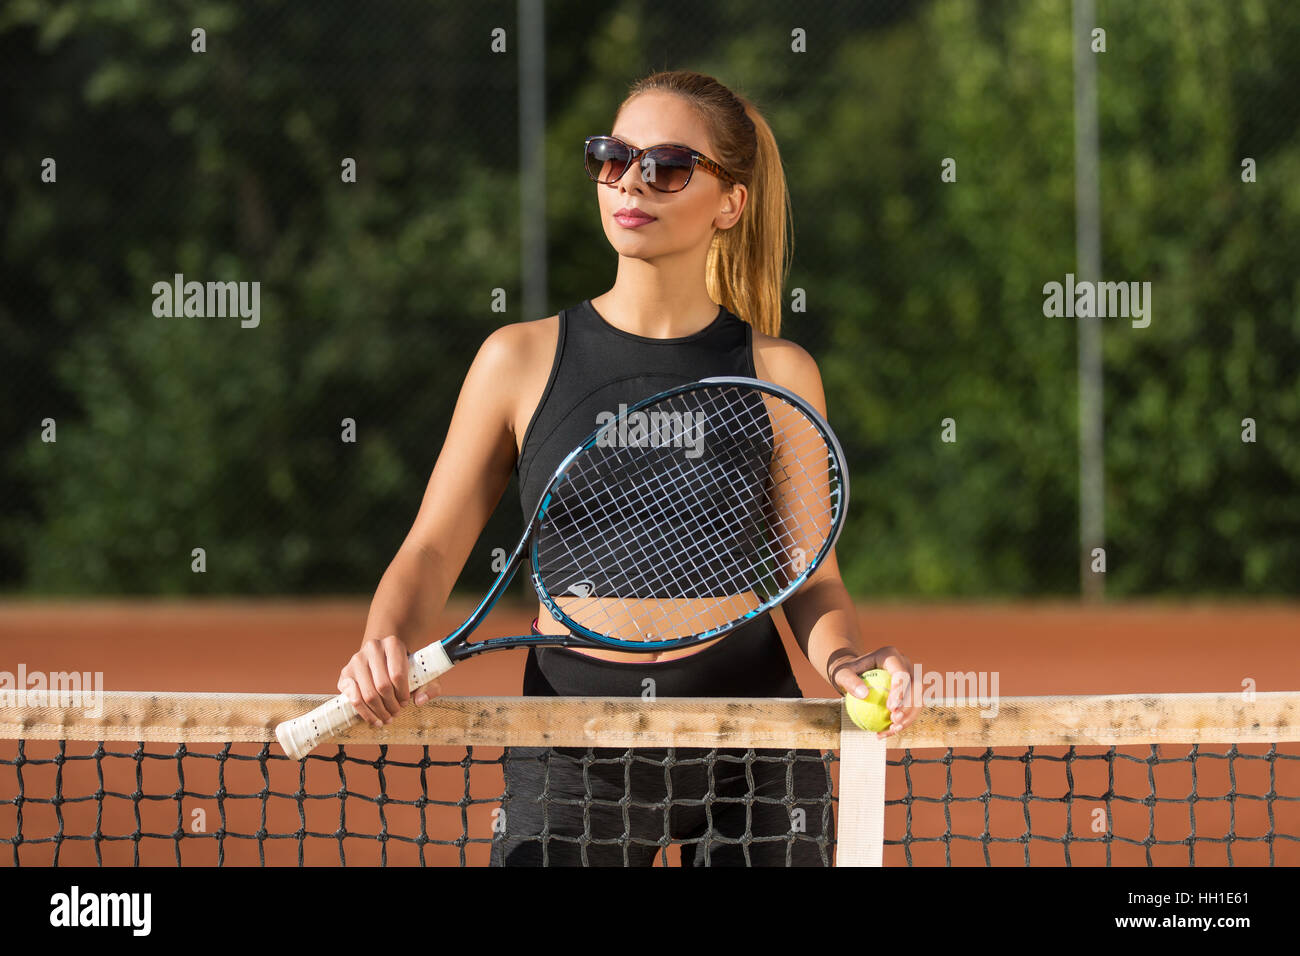 Young woman at net with tennis racket, tennis court, Switzerland Stock Photo